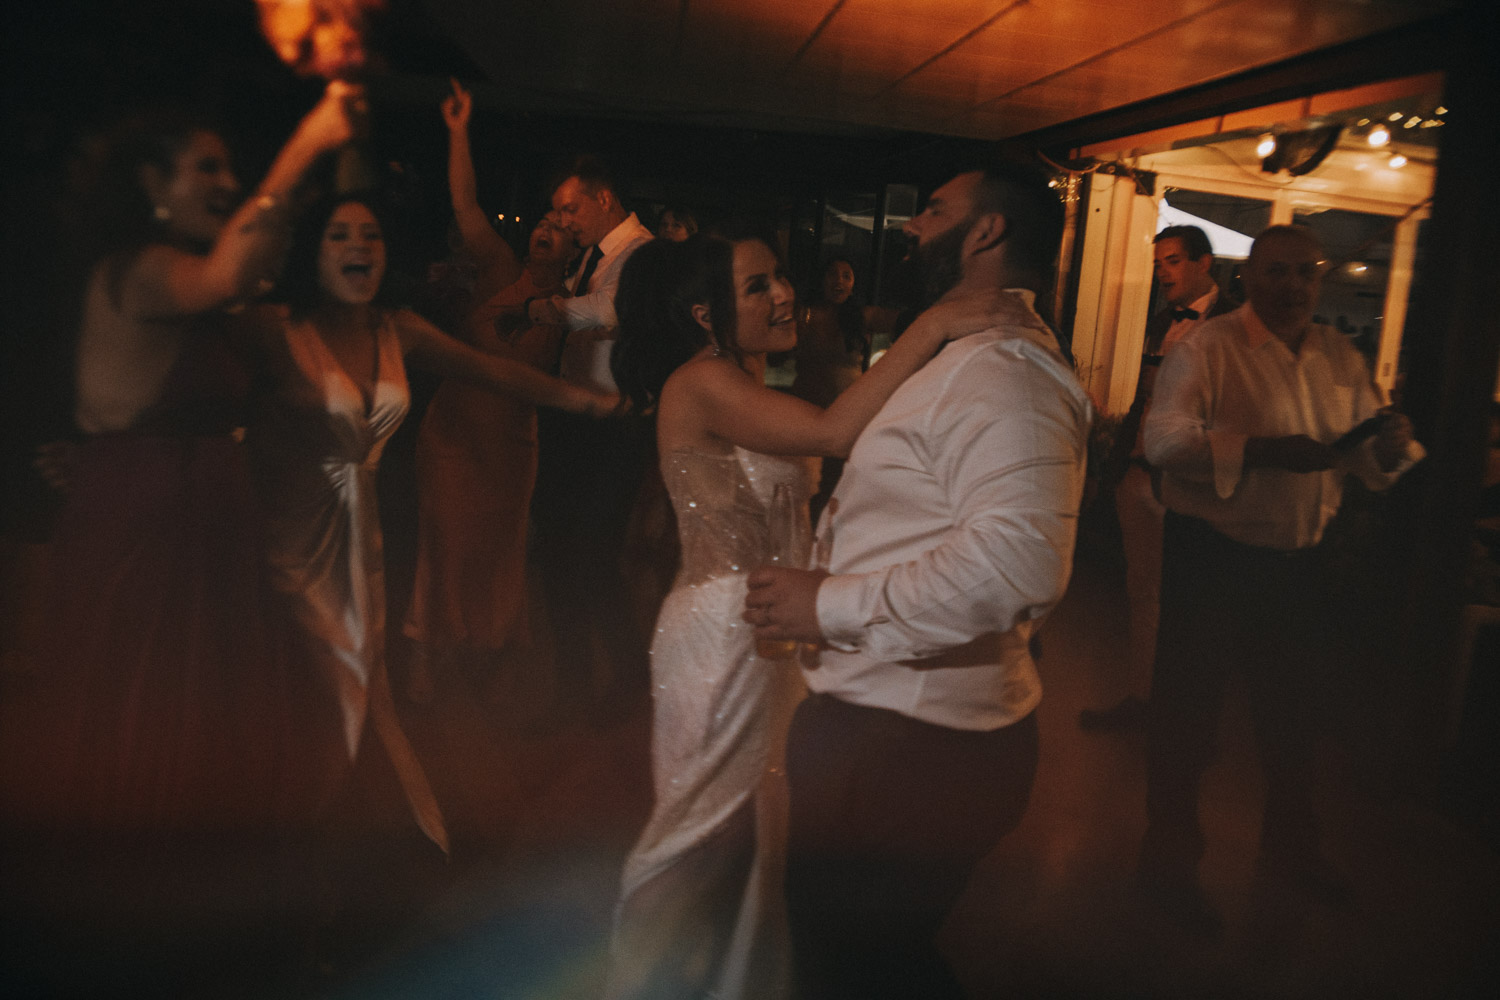 In the soft, warm glow of the celebration, a bride in a shimmering gown dances closely with her groom, whose shirt echoes the intimacy of the moment with its sleeves casually rolled up. They are surrounded by jubilant guests, lost in the revelry of dance, their joyous expressions and lively movements creating an atmosphere of unbridled festivity. This candid capture by a wedding photographer showcases the vivacious spirit of a reception, a testament to the photographer's ability to encapsulate the essence of the couple’s joyous day through spontaneous and emotive imagery.